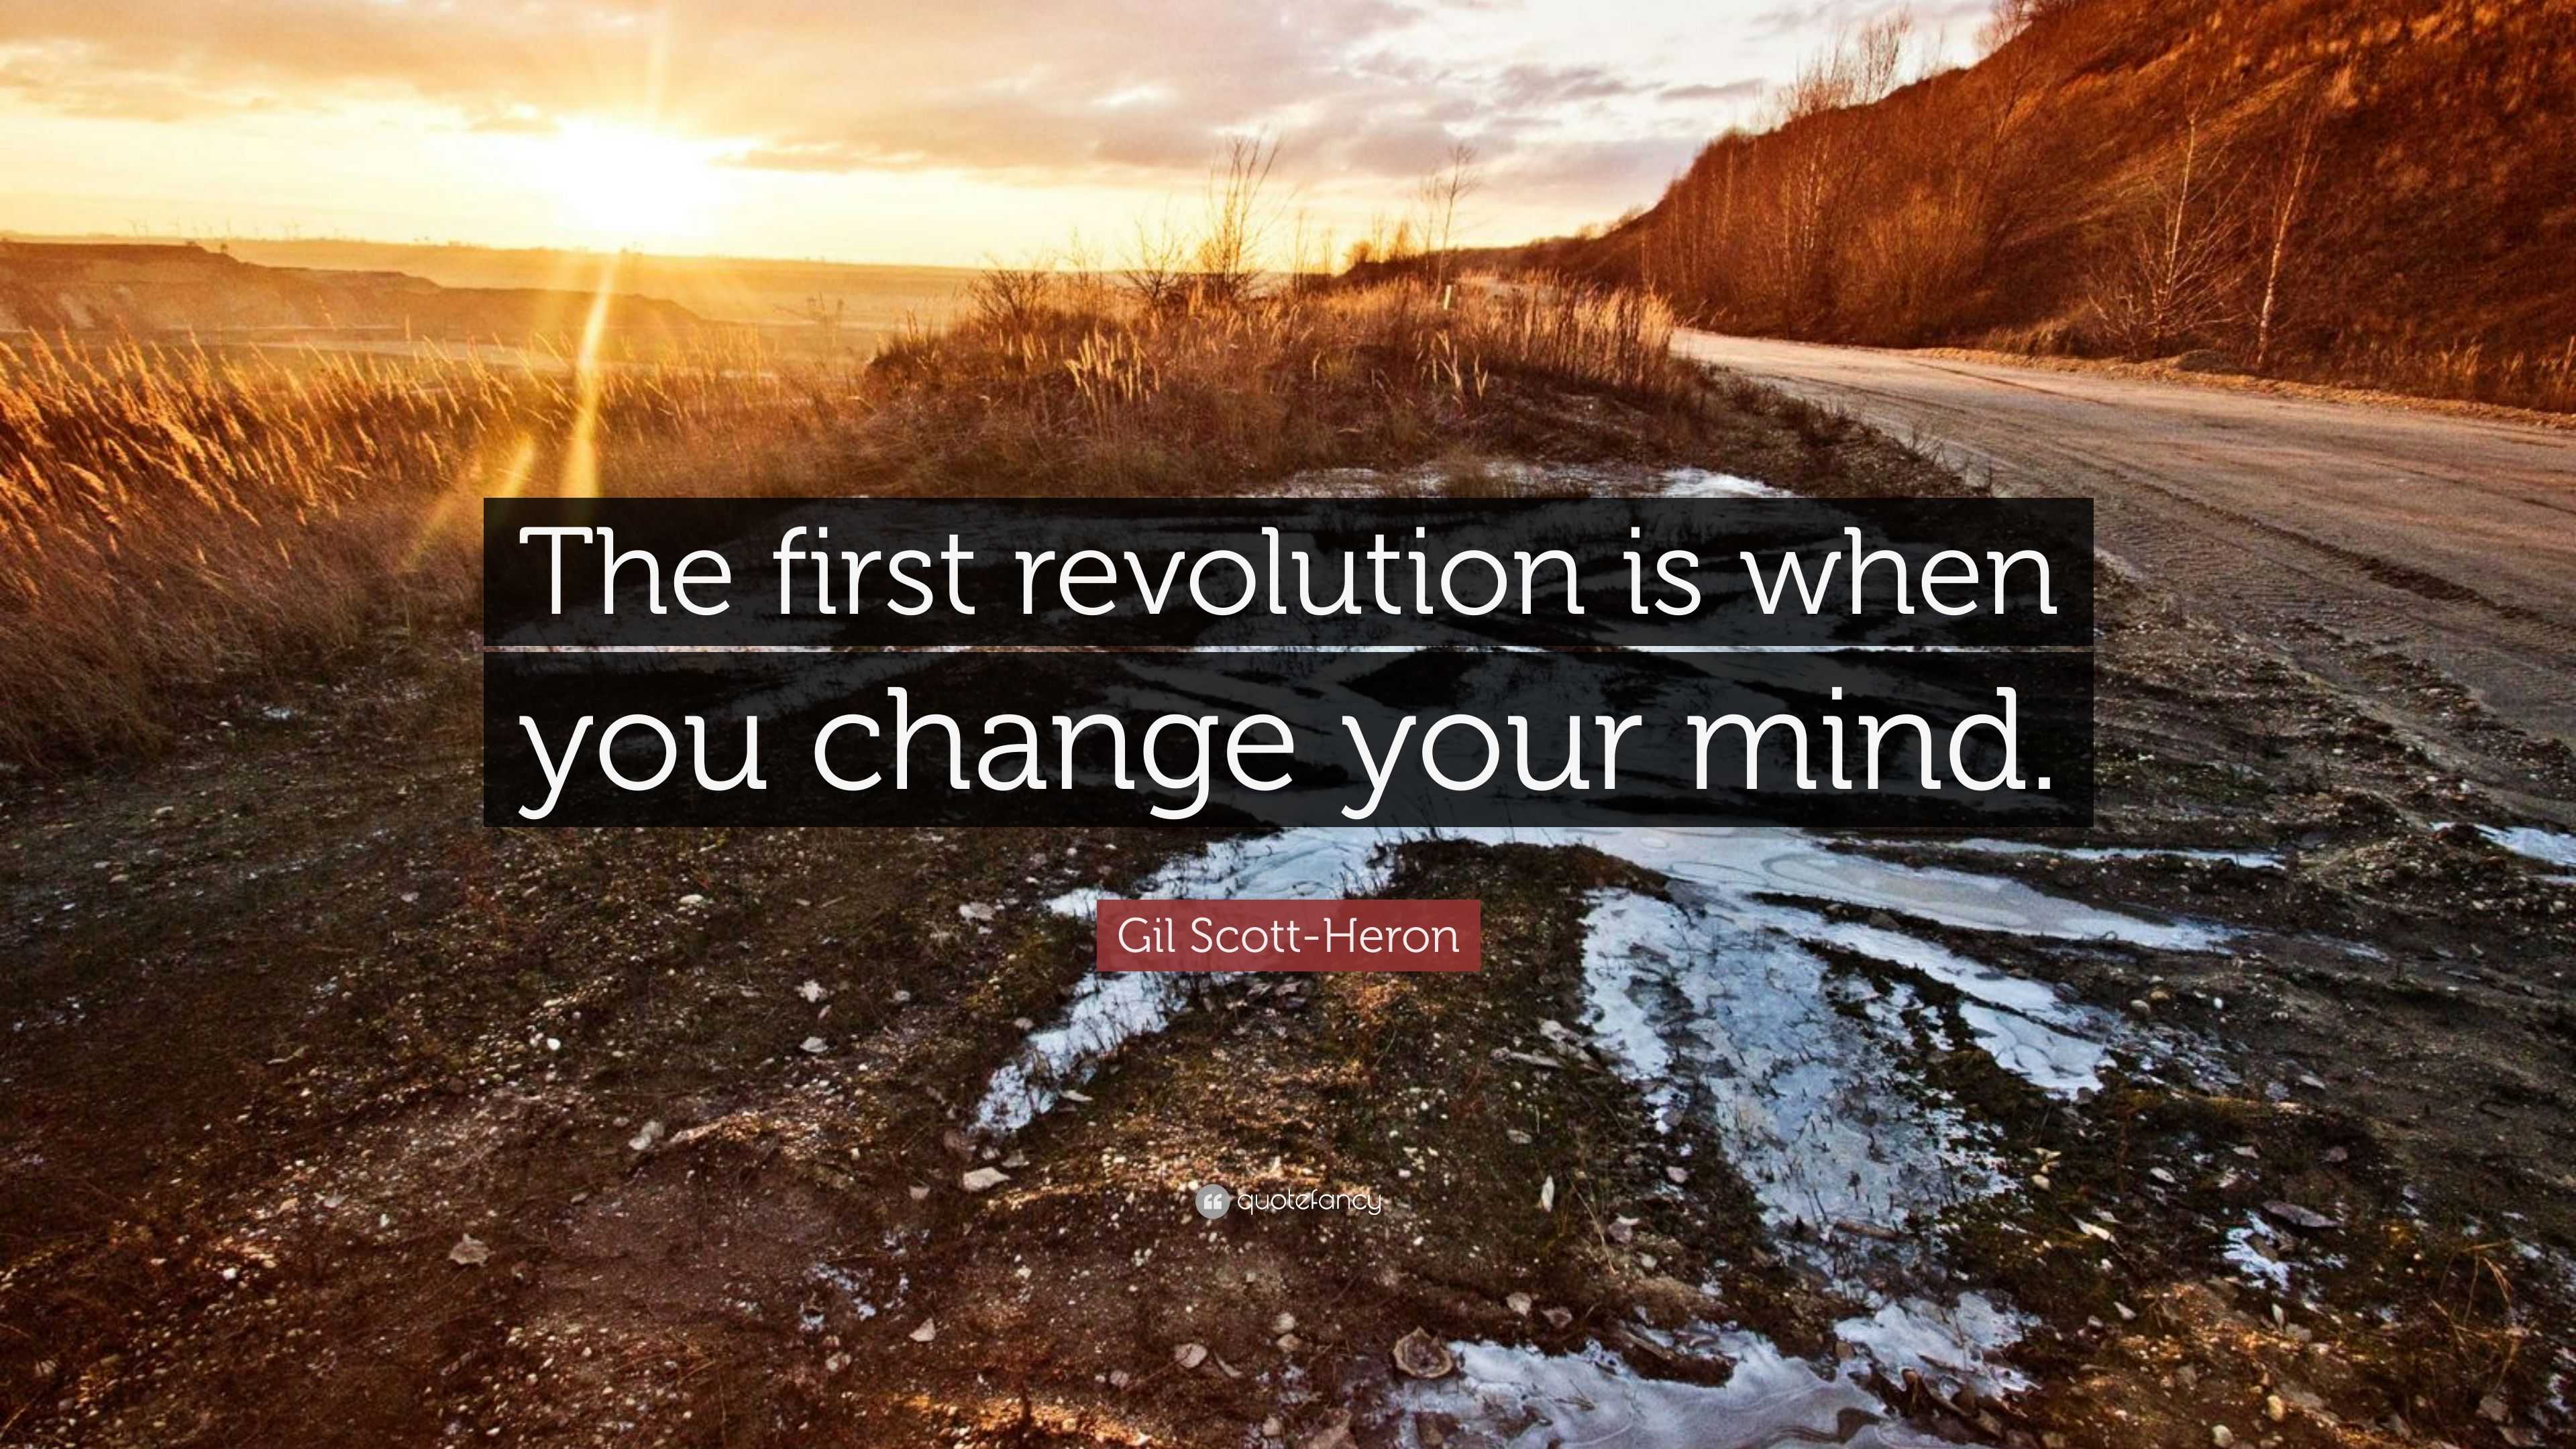 Gil Scott-Heron Quote: “The first revolution is when you change your mind.”